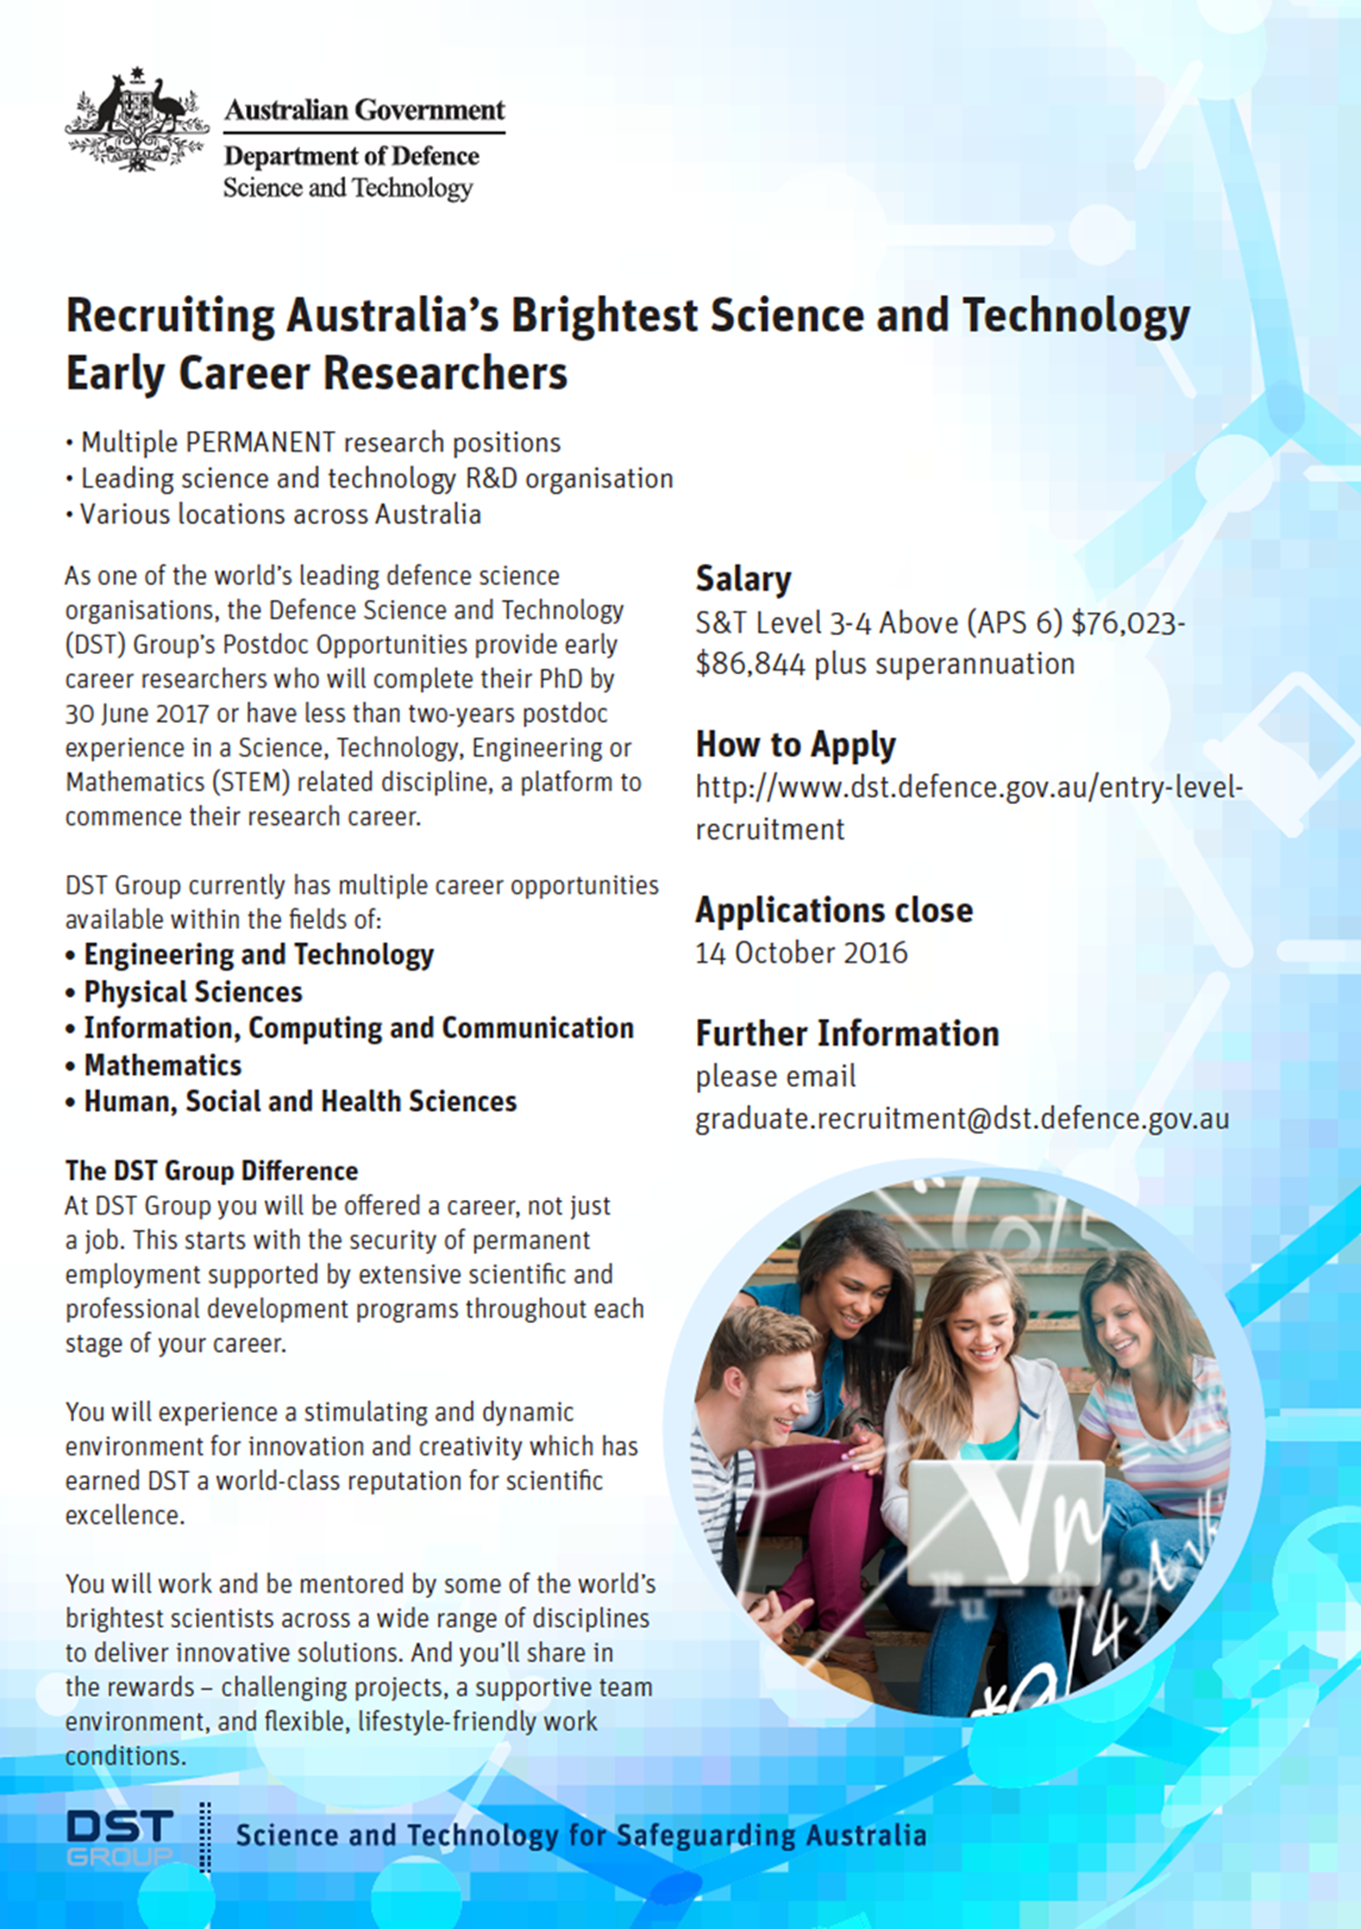 Recruiting Australia’s Brightest Science and Technology Early Career Researchers